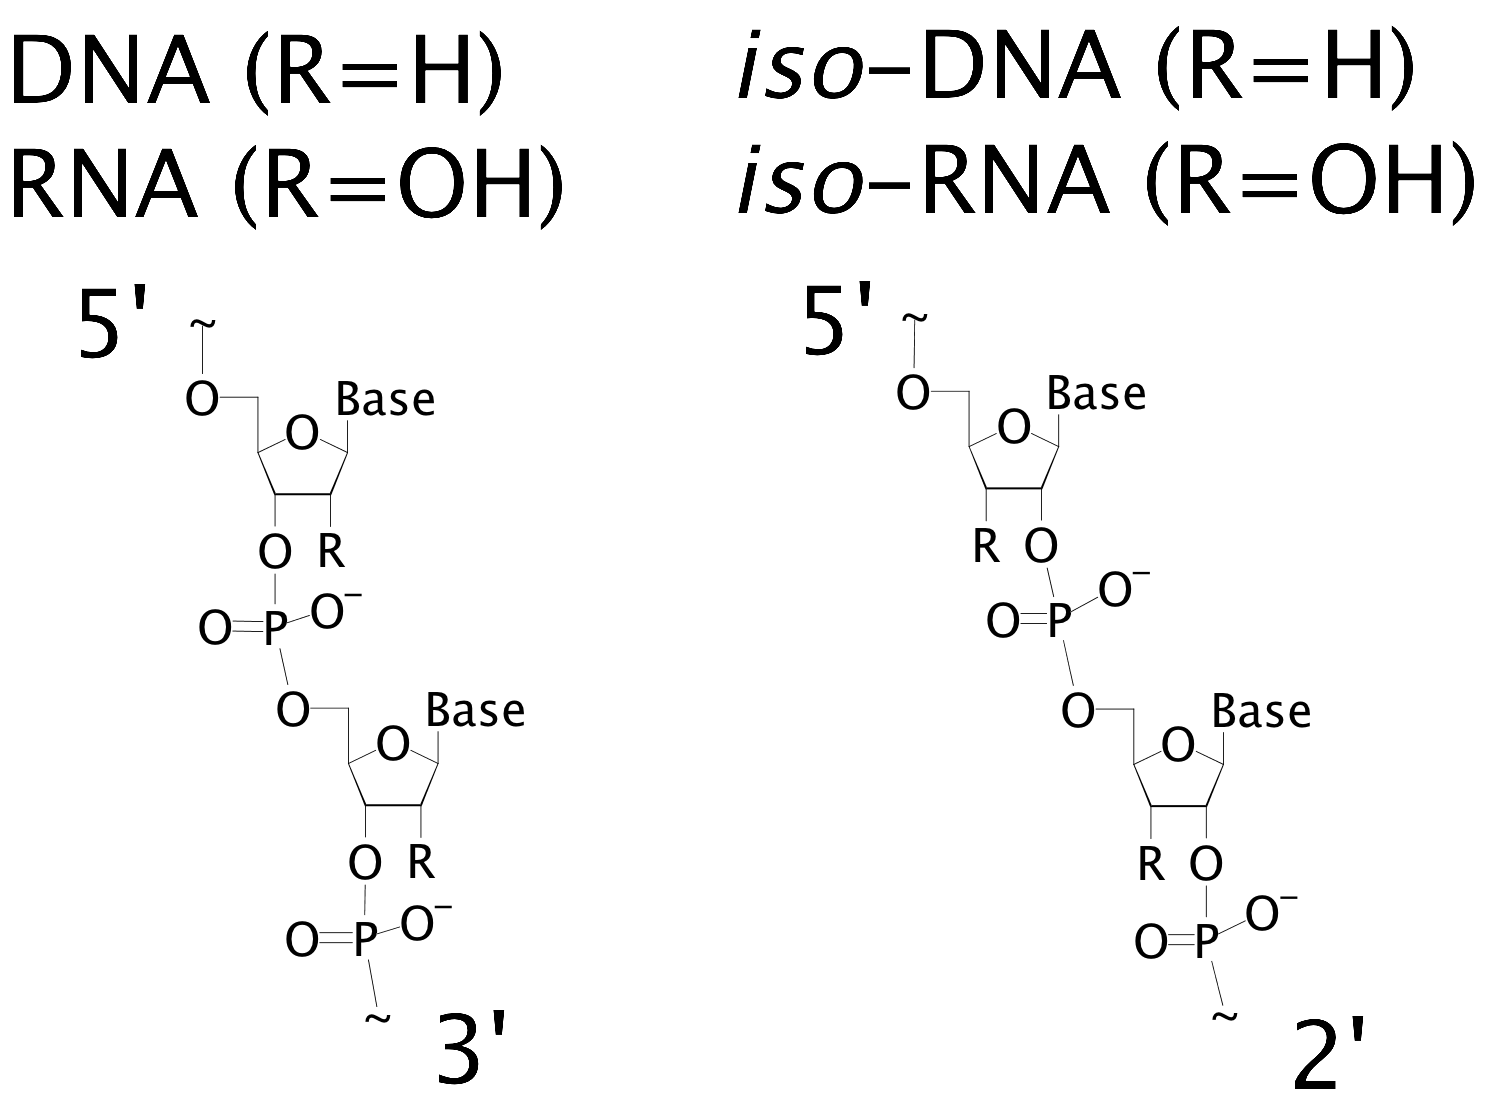 Left: traditional DNA and RNA linking scheme. Right: iso- DNA and RNA
linking scheme. The R-group of DNA is H; for RNA the R-group is OH.